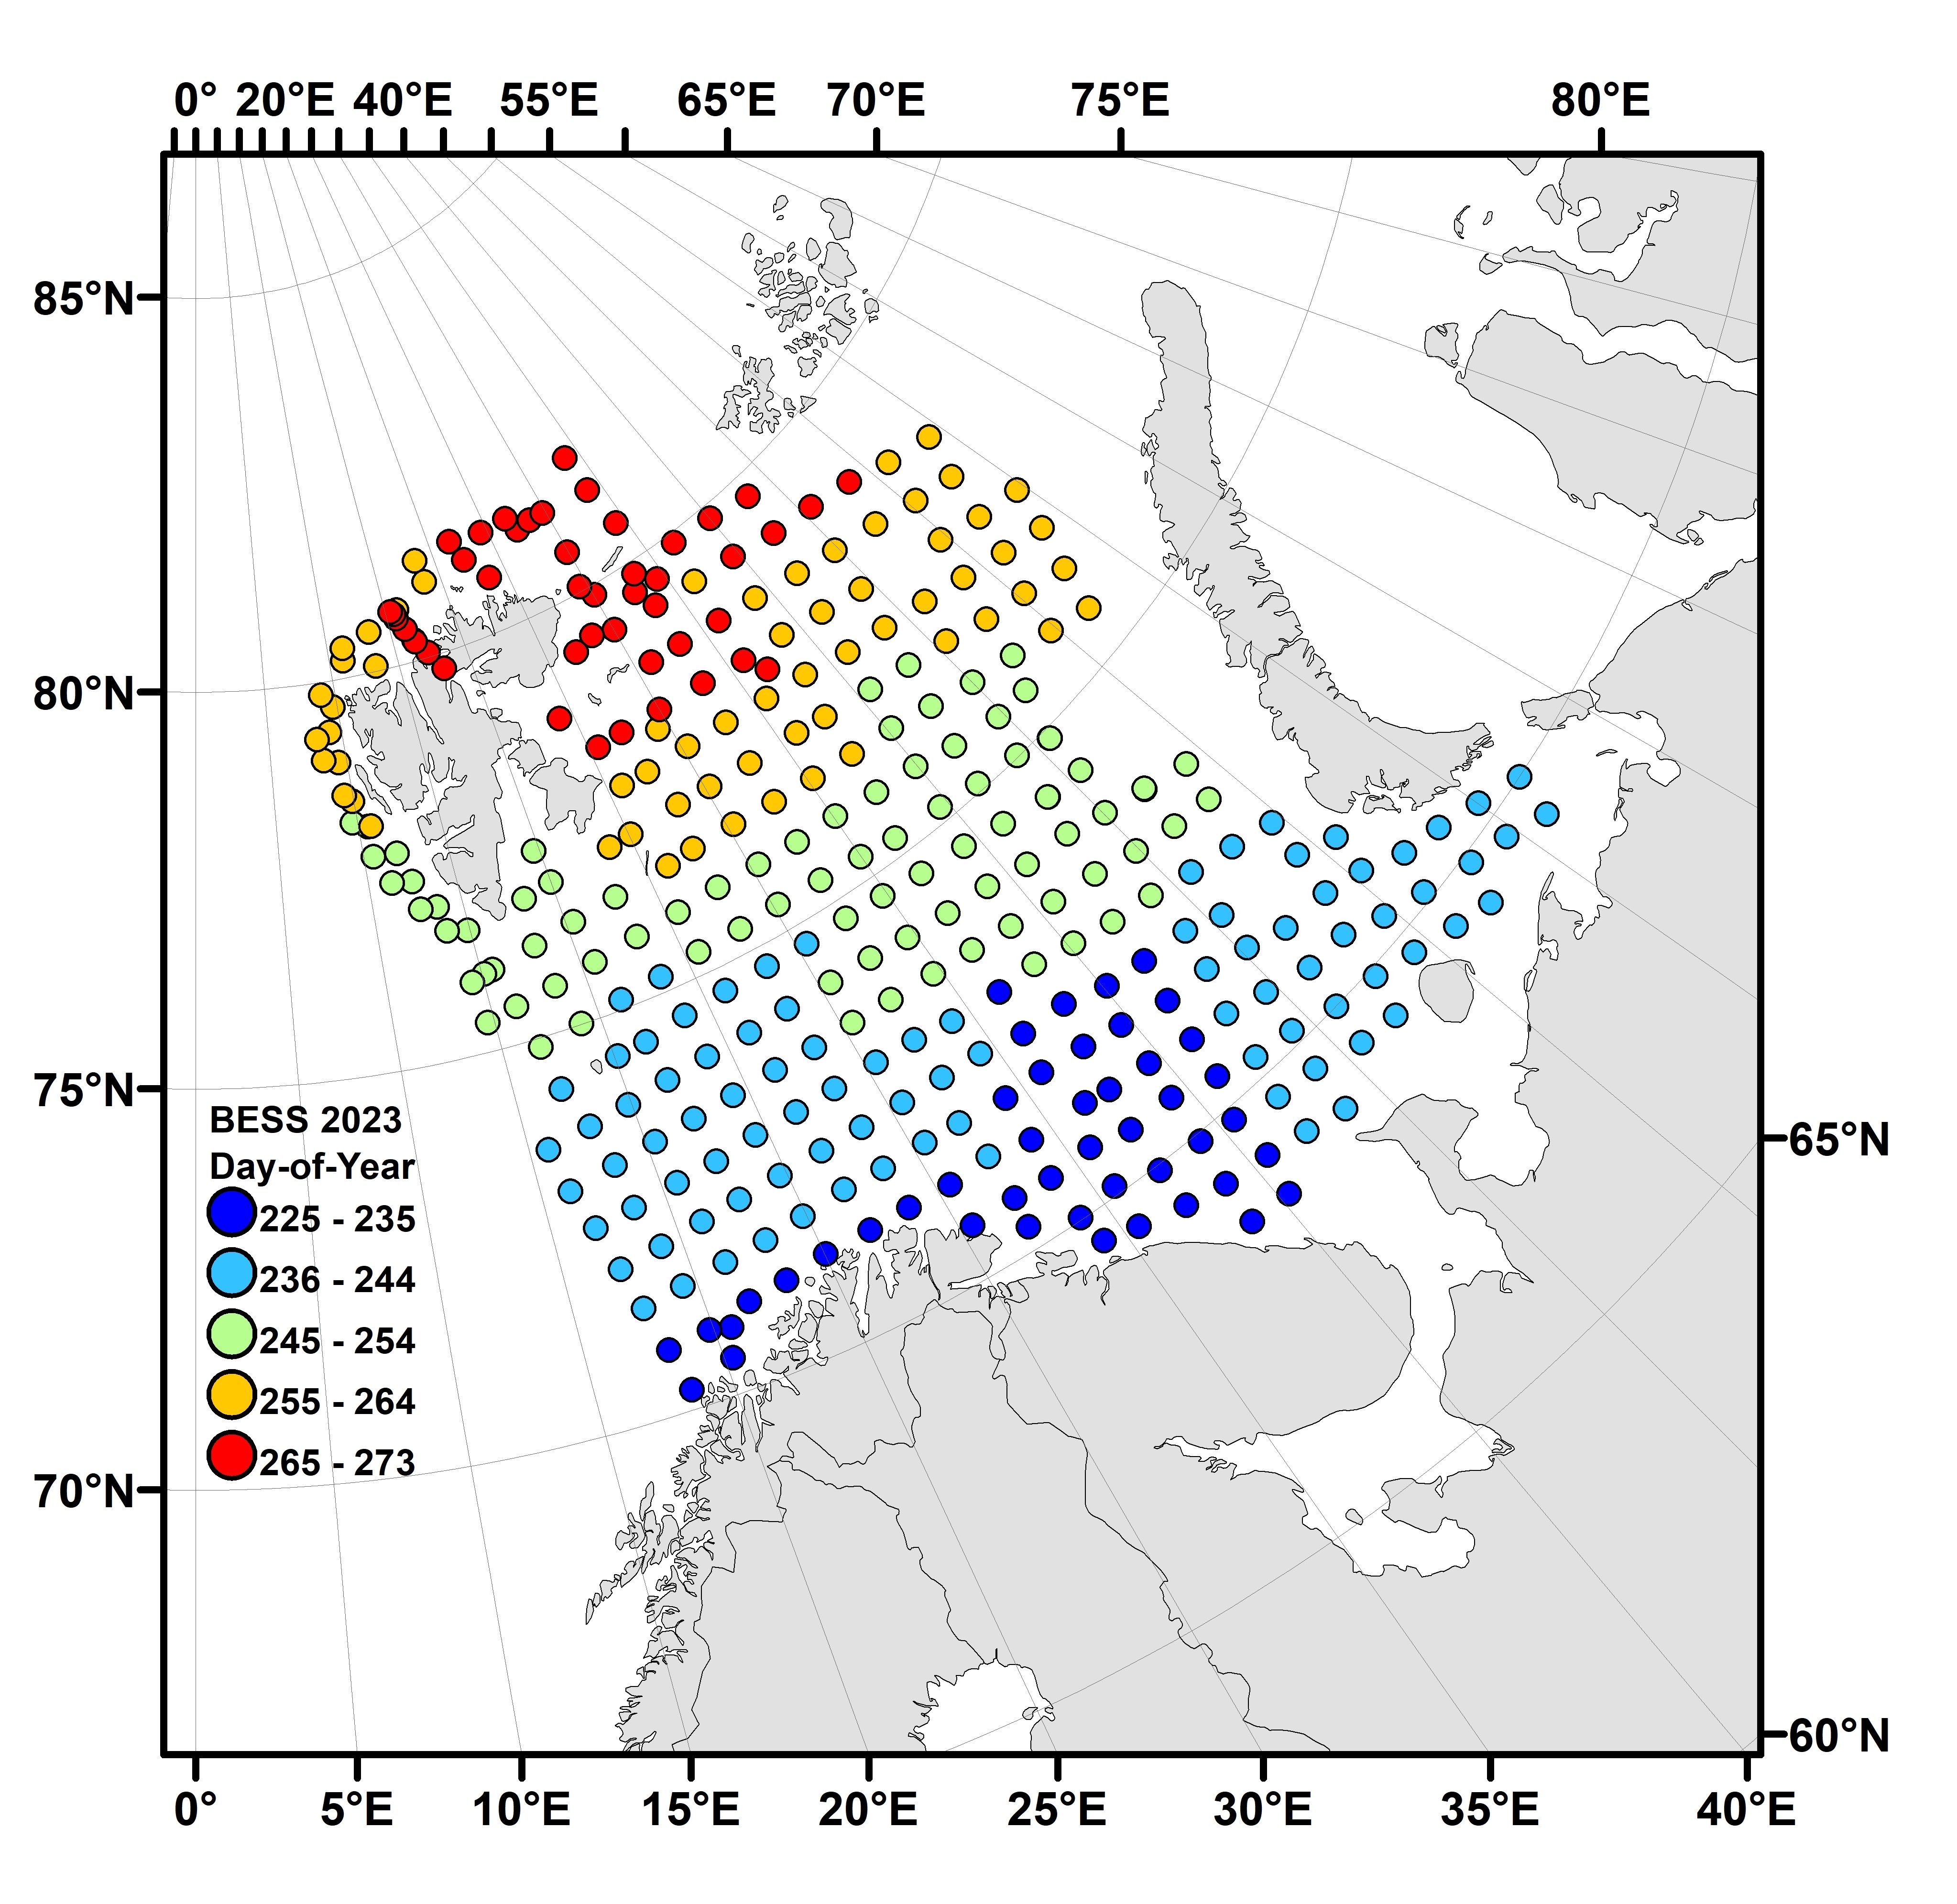 Figure 2.4. Progression of BESS 2023 in space and time. Points represent samples taken at ecosystem stations during the survey. The point’s colour indicates the number of Julian days between the first and last day of the survey. The colours scale from blue (early in the survey) to red (late in the survey).